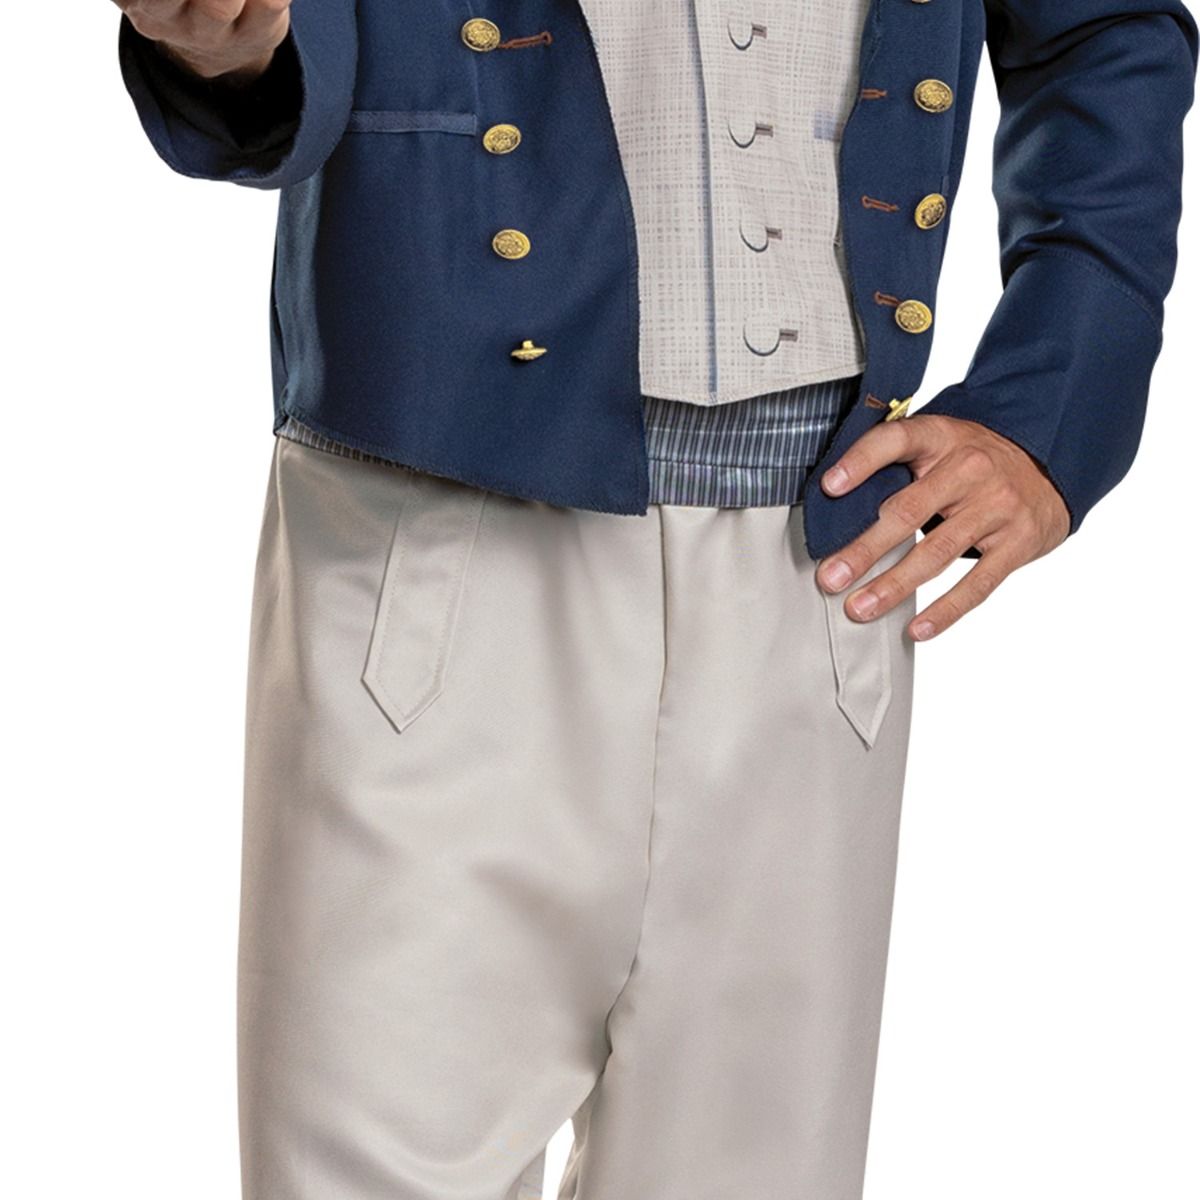 Prince Eric Deluxe Adult Costume